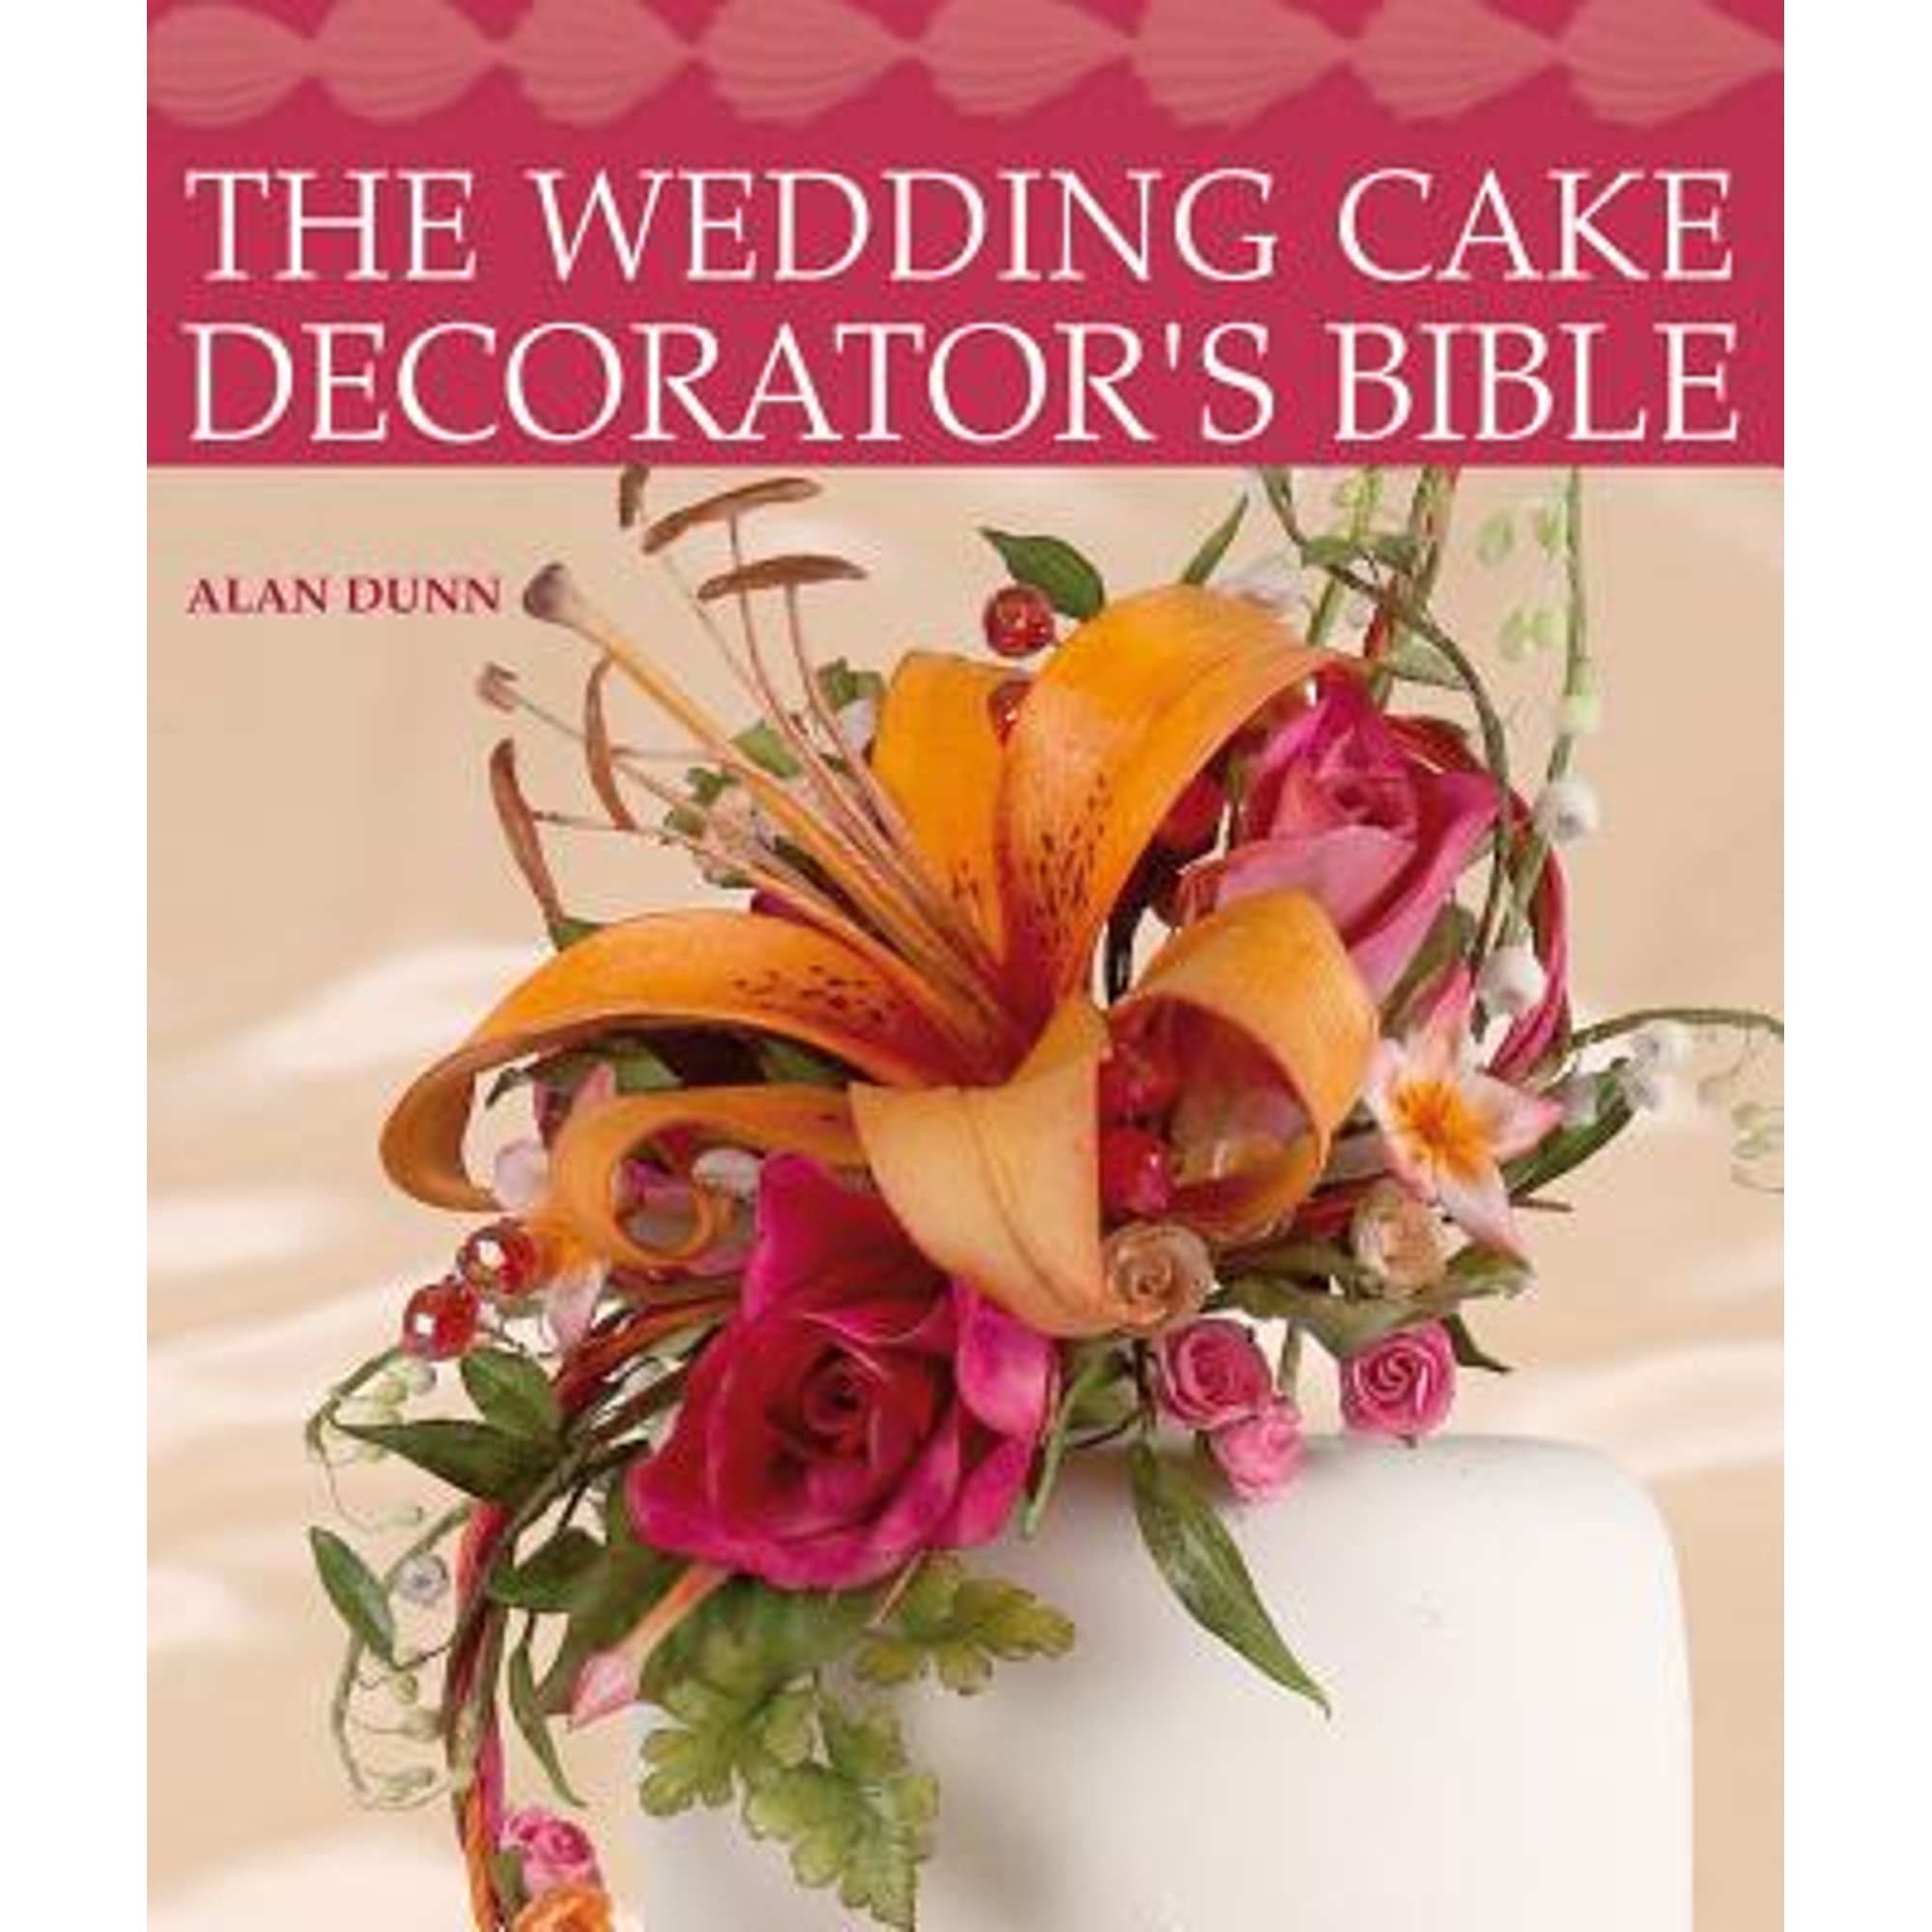 The Wedding Cake Decorator's Bible : A Resource of Mix-And-Match Designs and Embellishments (Paperback) - image 1 of 1